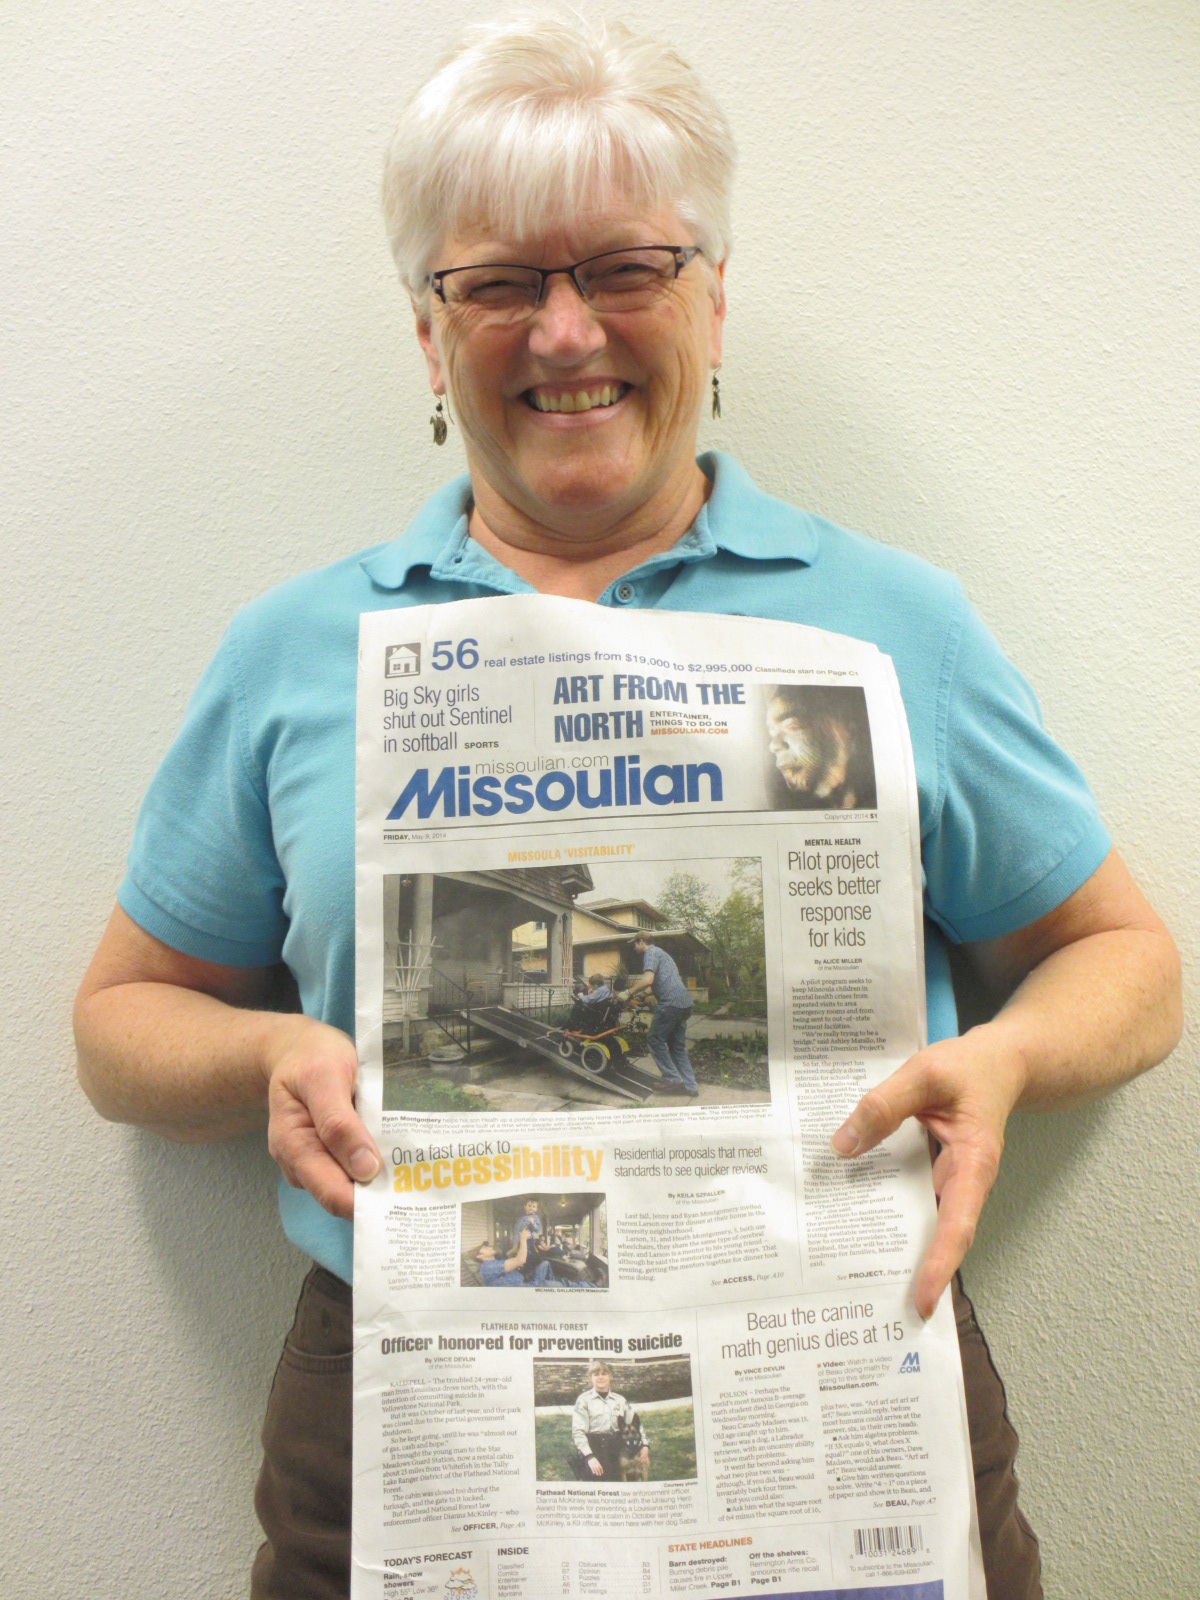 Summit's Jude Monson holding up a Missoulian newspaper showing a story about Visitability on the front page